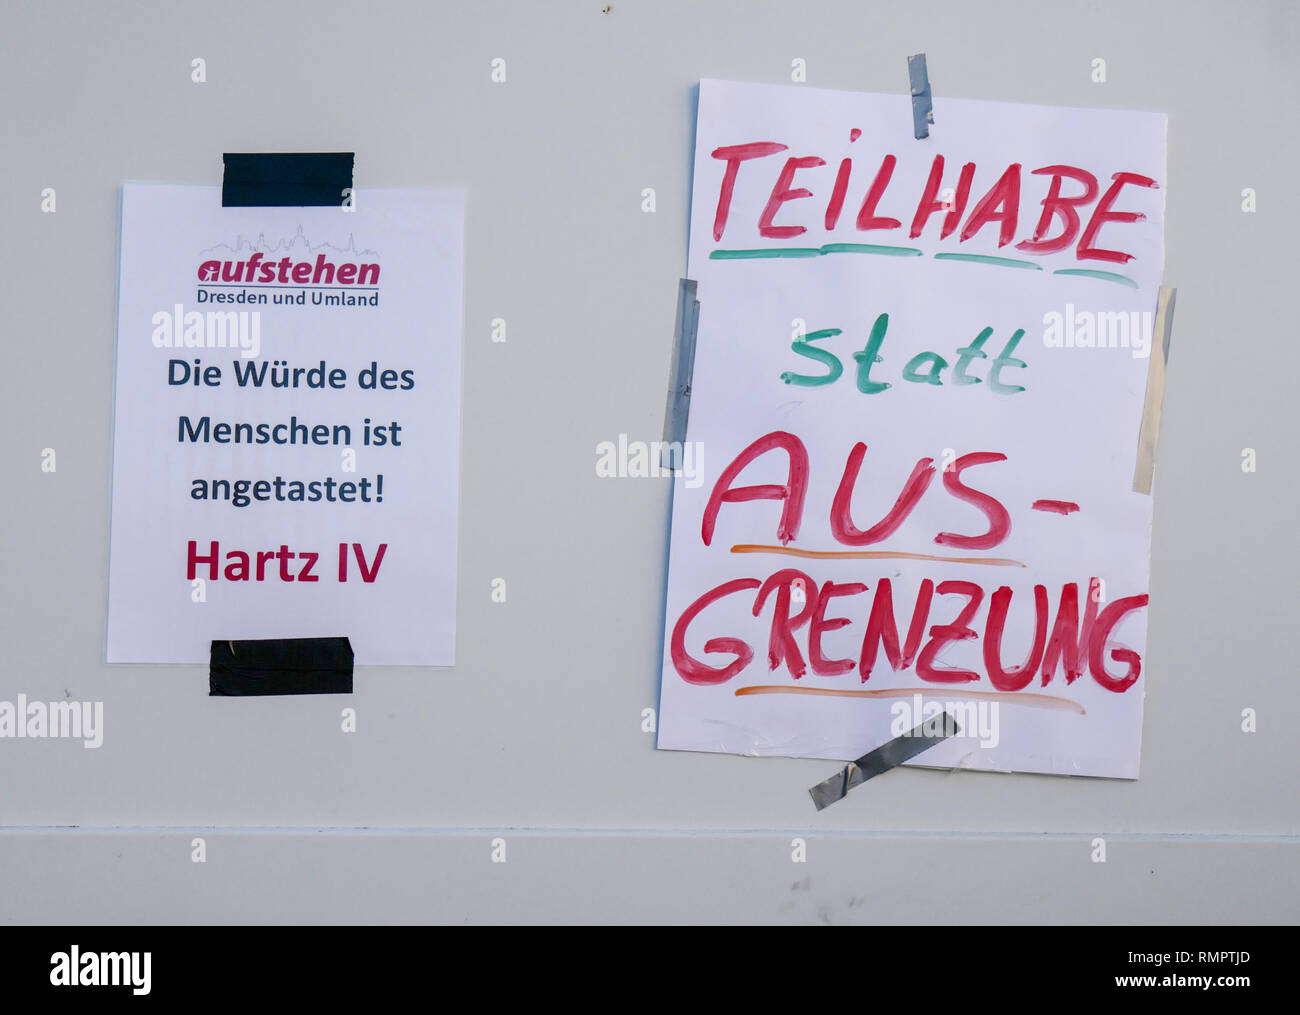 Dresden, Germany. 16th Feb, 2019. Posters with the inscription 'Die Würde des Menschen ist angetastet' Hartz IV and 'Teilhabe statt Ausgrenzung' of the collection movement 'Aufstehen - Die Sammlungsbewegung' are glued to a transporter wall at one of the nationwide demonstrations in Dresden. The demonstrators are called upon to appear in colourful warning vests, modelled on the French yellow vests. Demonstrations were announced in at least 14 German cities. Credit: Peter Endig/dpa/Alamy Live News Stock Photo